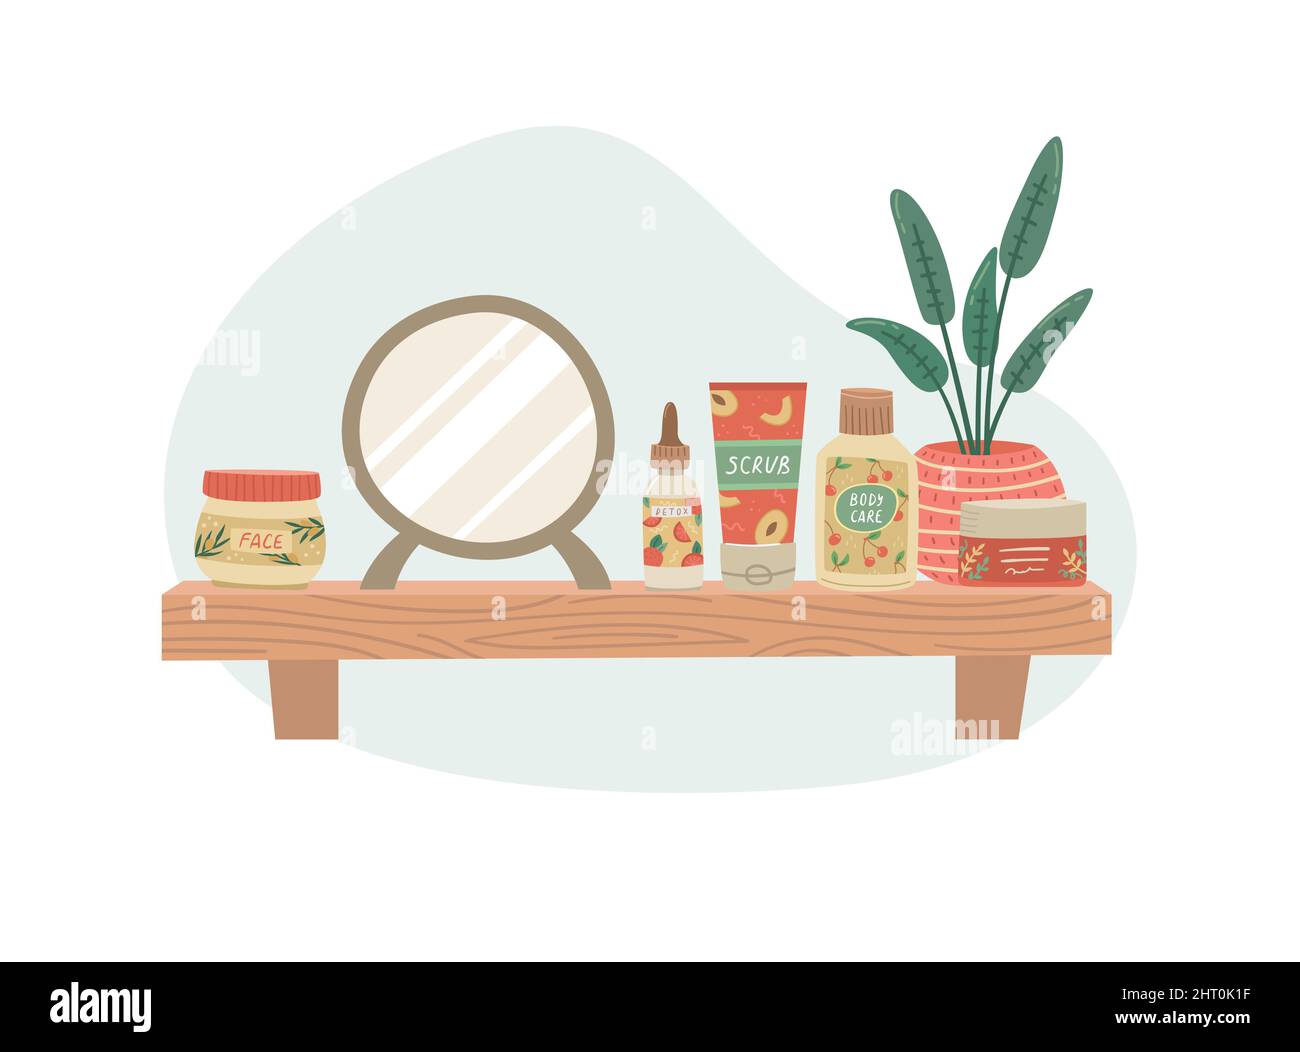 Vector illustration of a shelf with cosmetics for face and body care. Home cosmetic care. Stock Vector